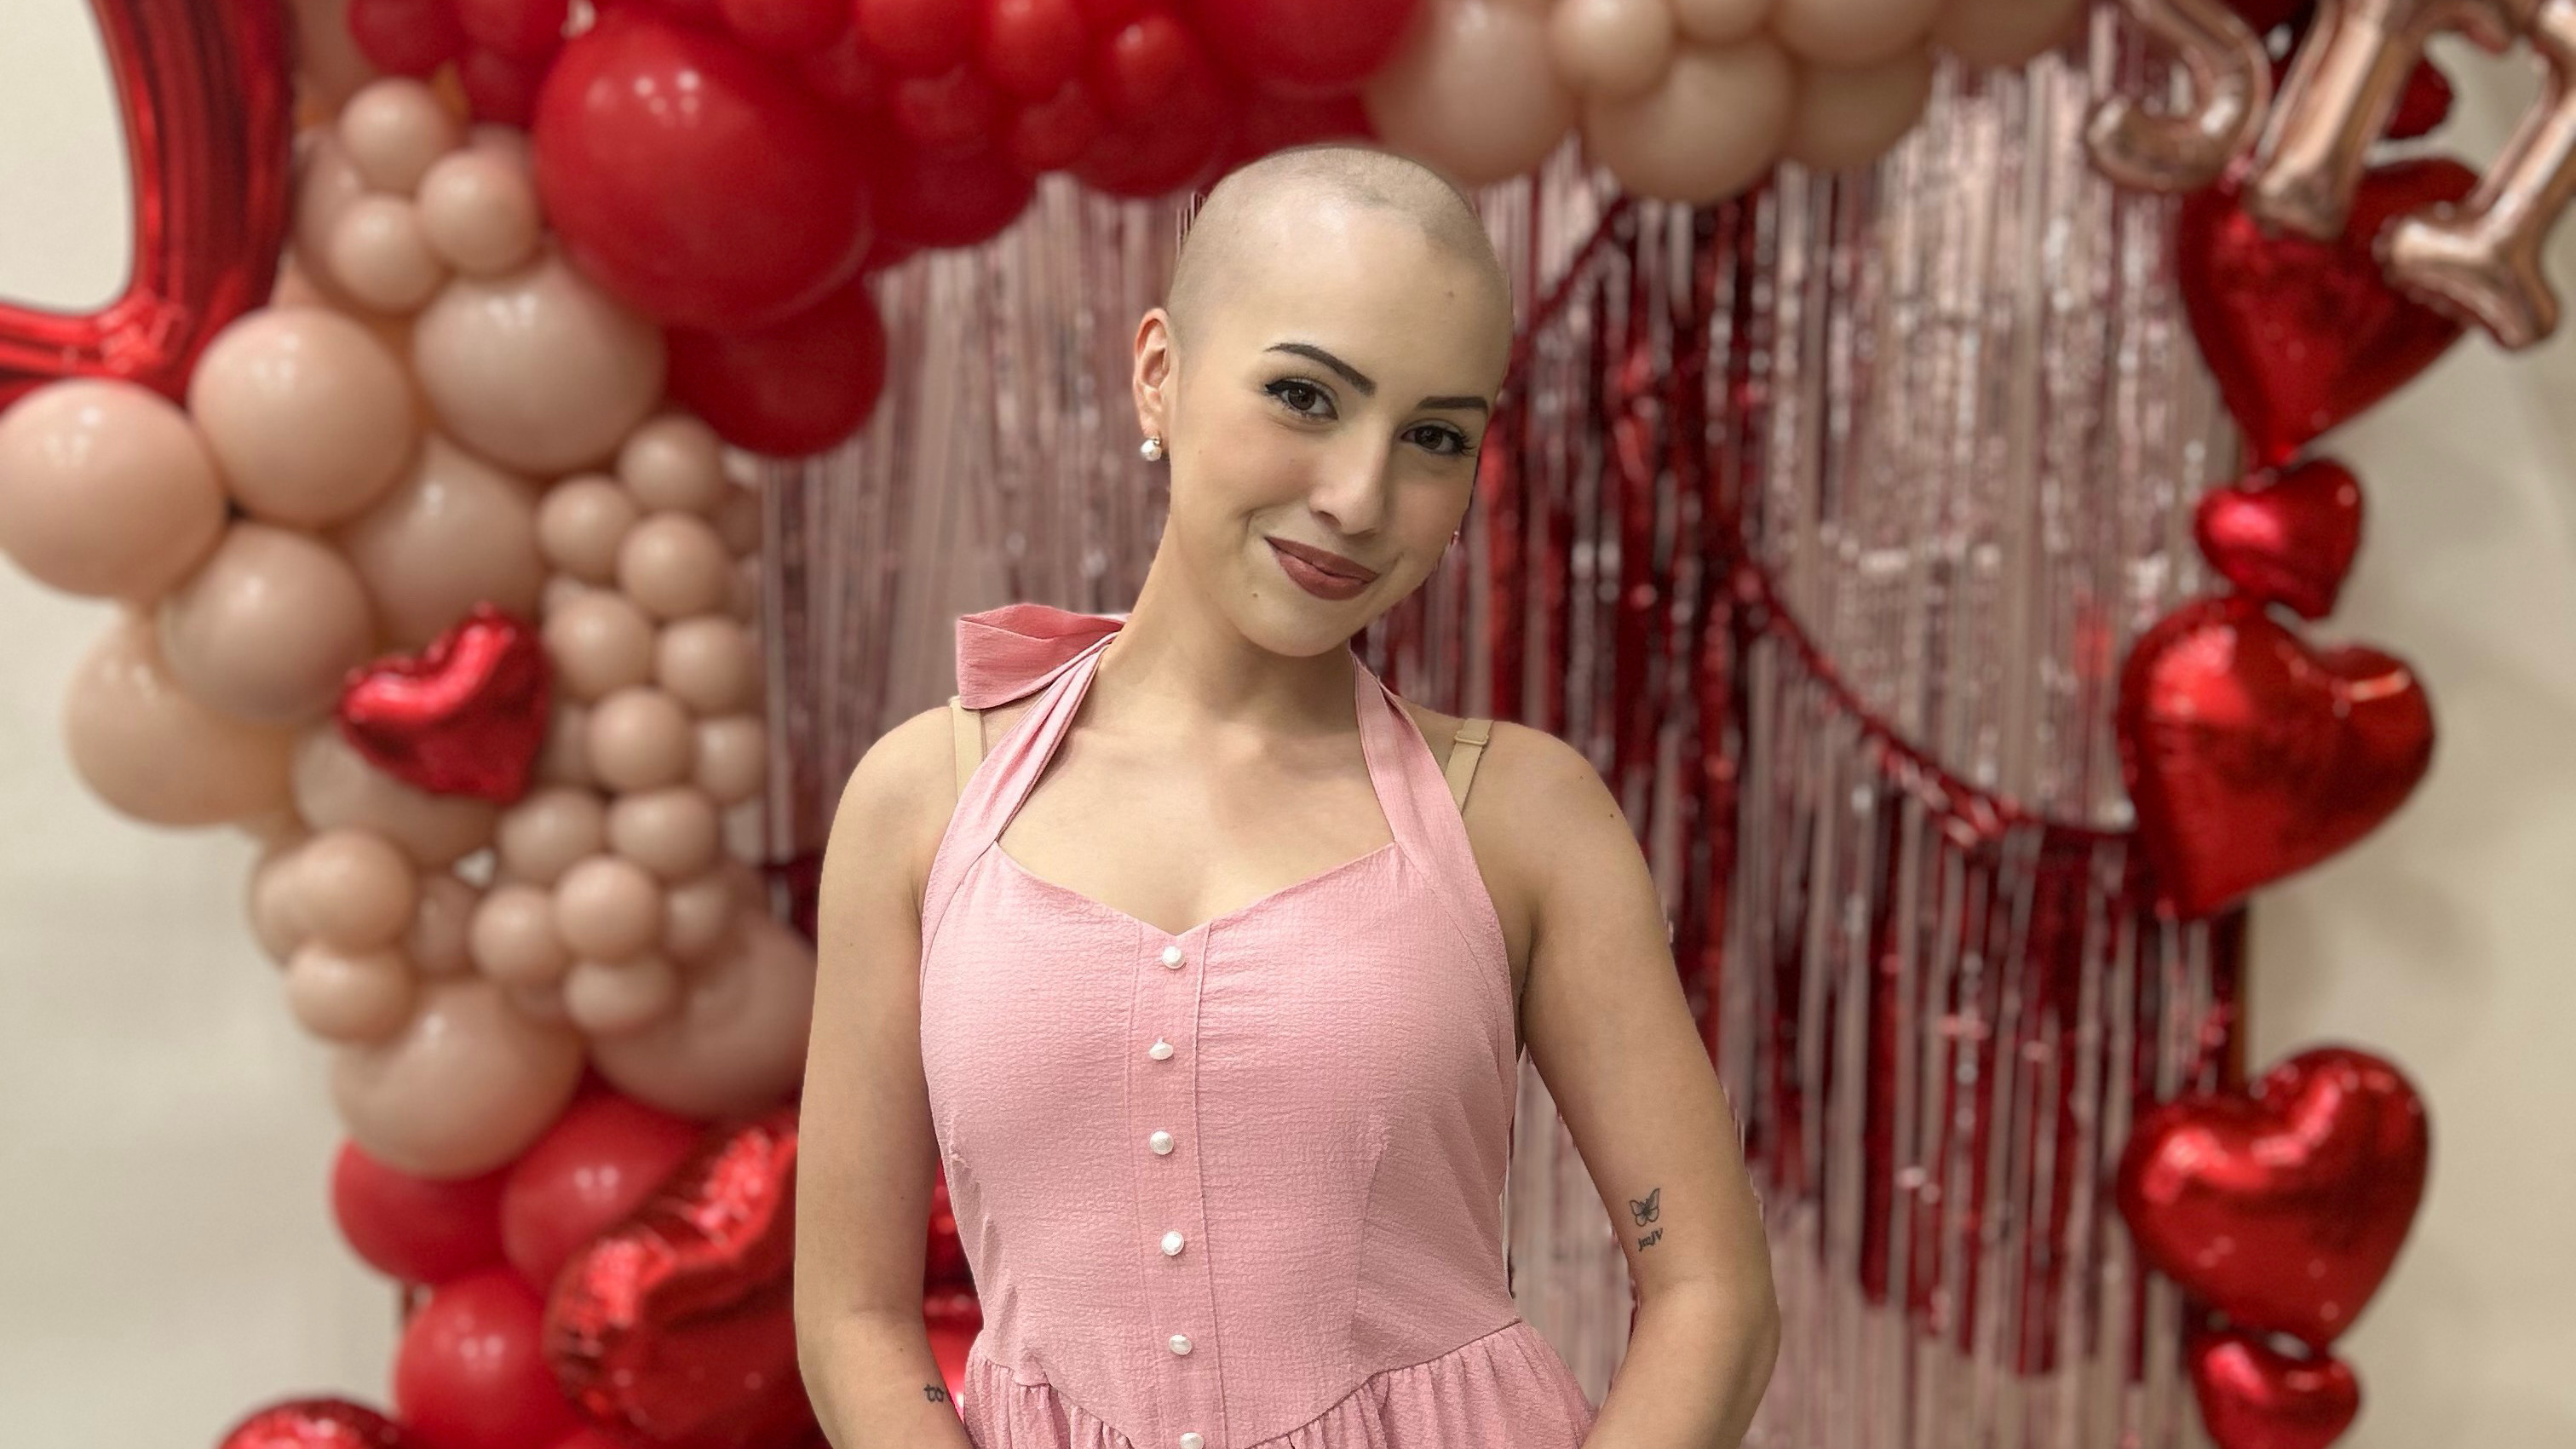 Valerie with a shaved head standing in front of balloons